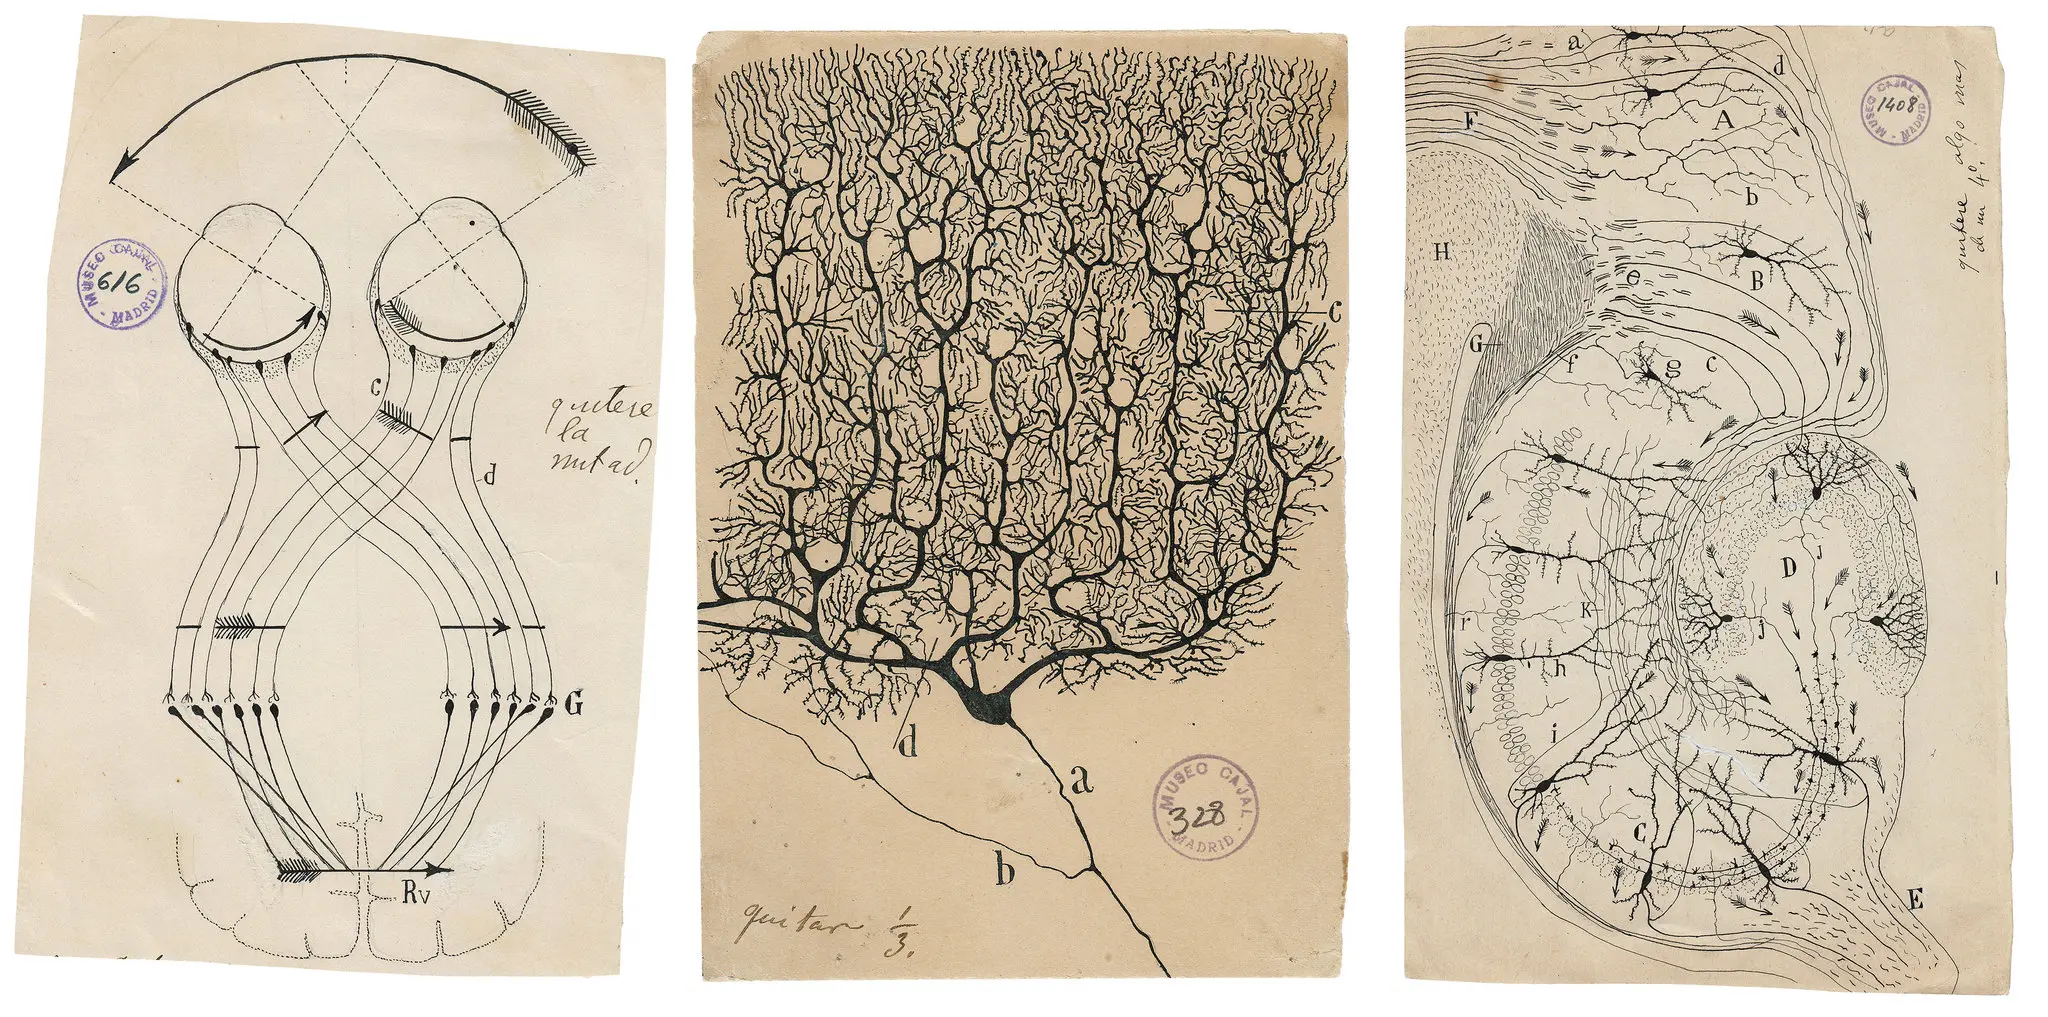 the illustrations of the brain by  Santiago Ramón y Cajal are great examples of science art